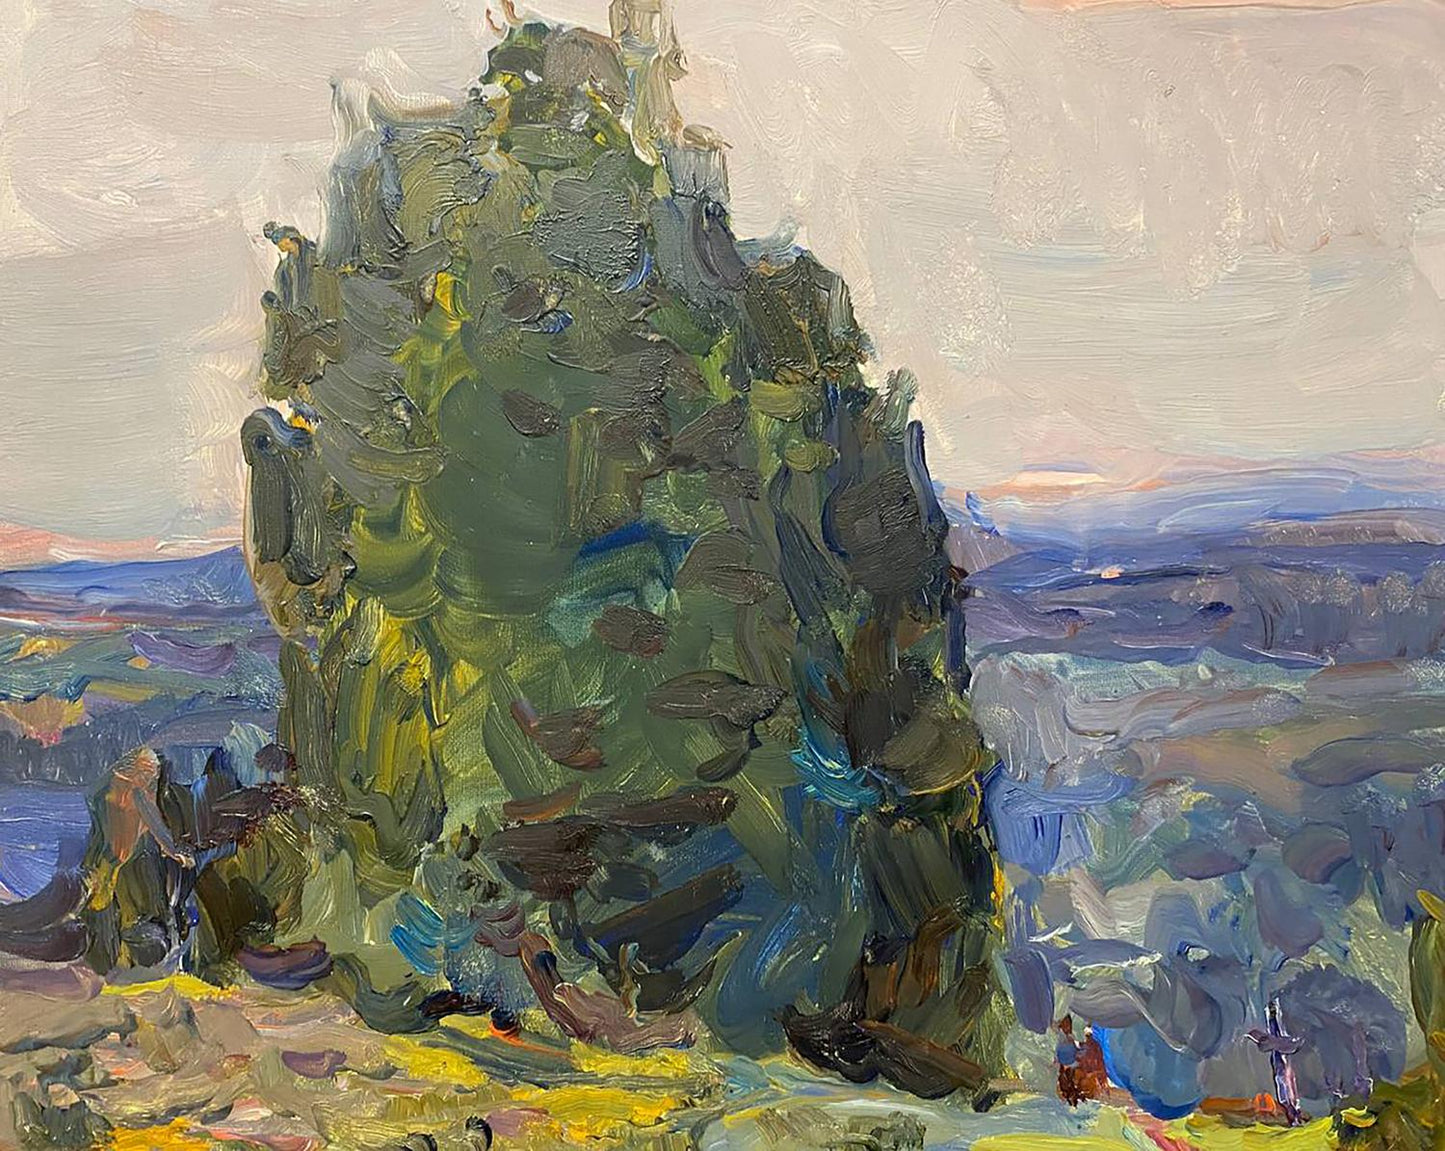 Oil painting On a hill Chernov Leonid Ivanovich